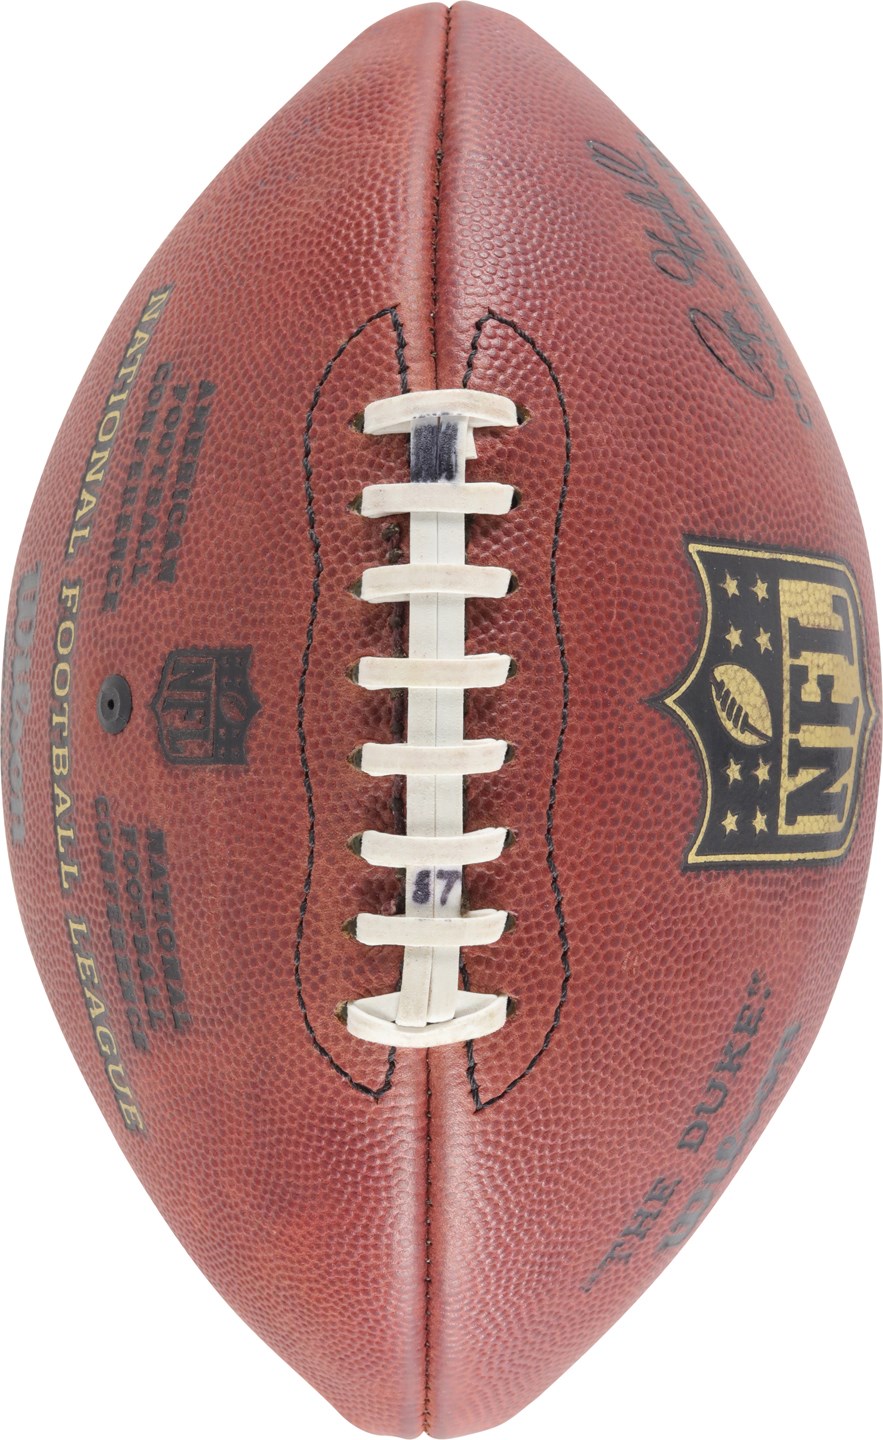 Football - Ron Gronkowski Game Used Football Given to Friend